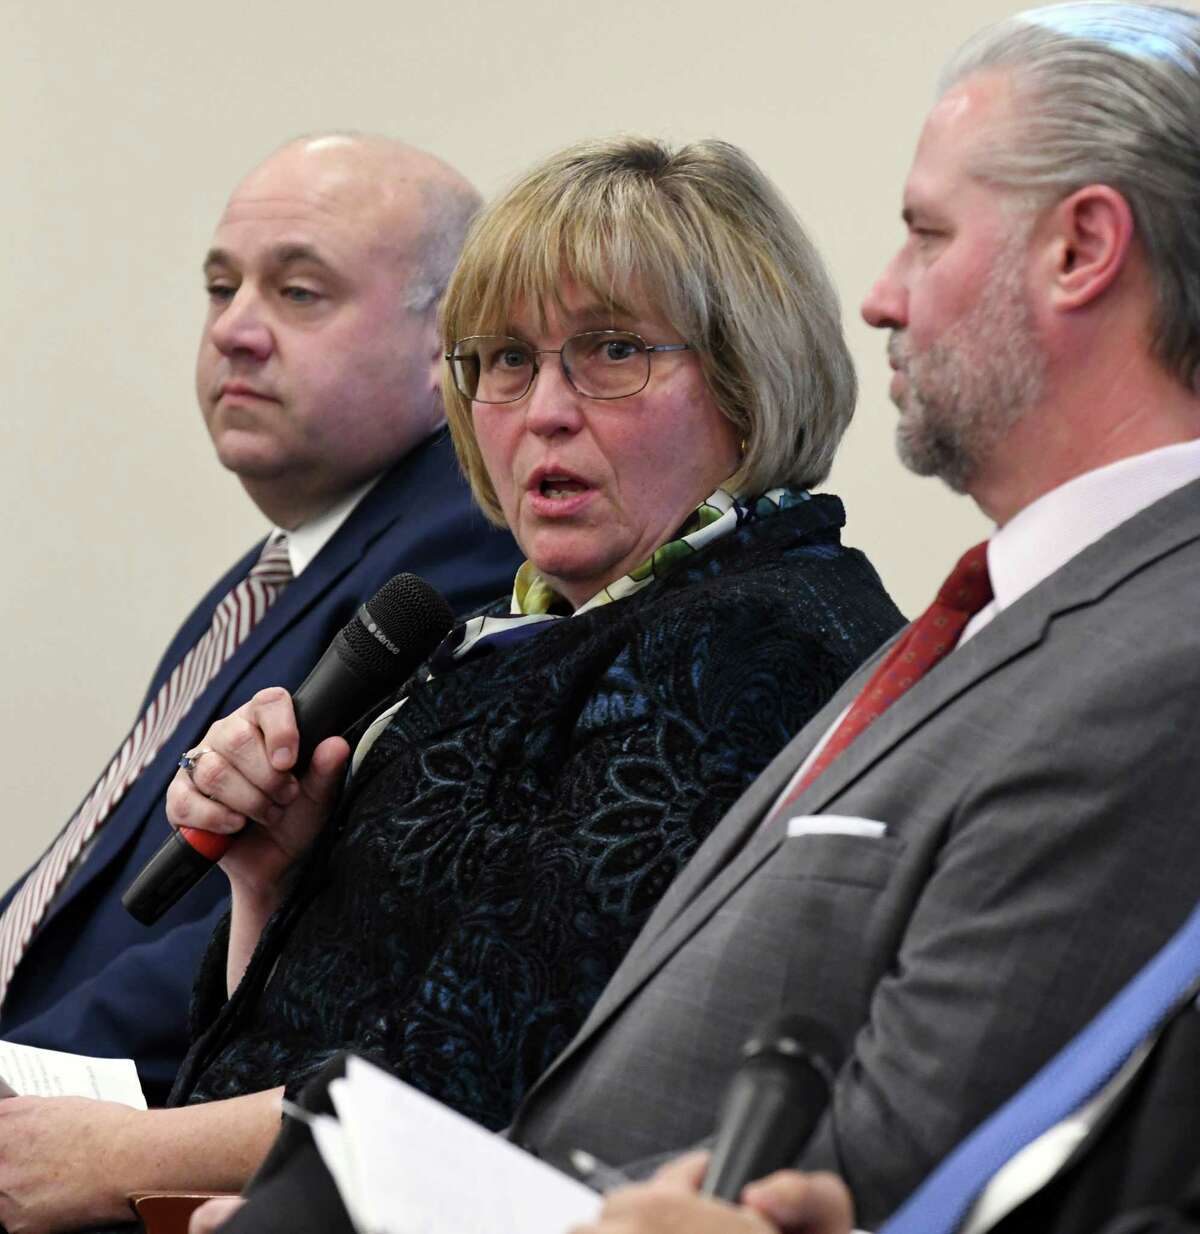 Maria Lehman, former chief operating officer and acting executive director for the New York State Thruway Authority, center, speaks during a forum on the rebuilding needs of the NYS Thruway on Monday, Nov. 26, 2018, in Colonie, N.Y. Joining her are; Michael Fleischer former Thruway authority executive director, left, and Thomas Madison former Thruway Authority executive director, right. (Will Waldron/Times Union)